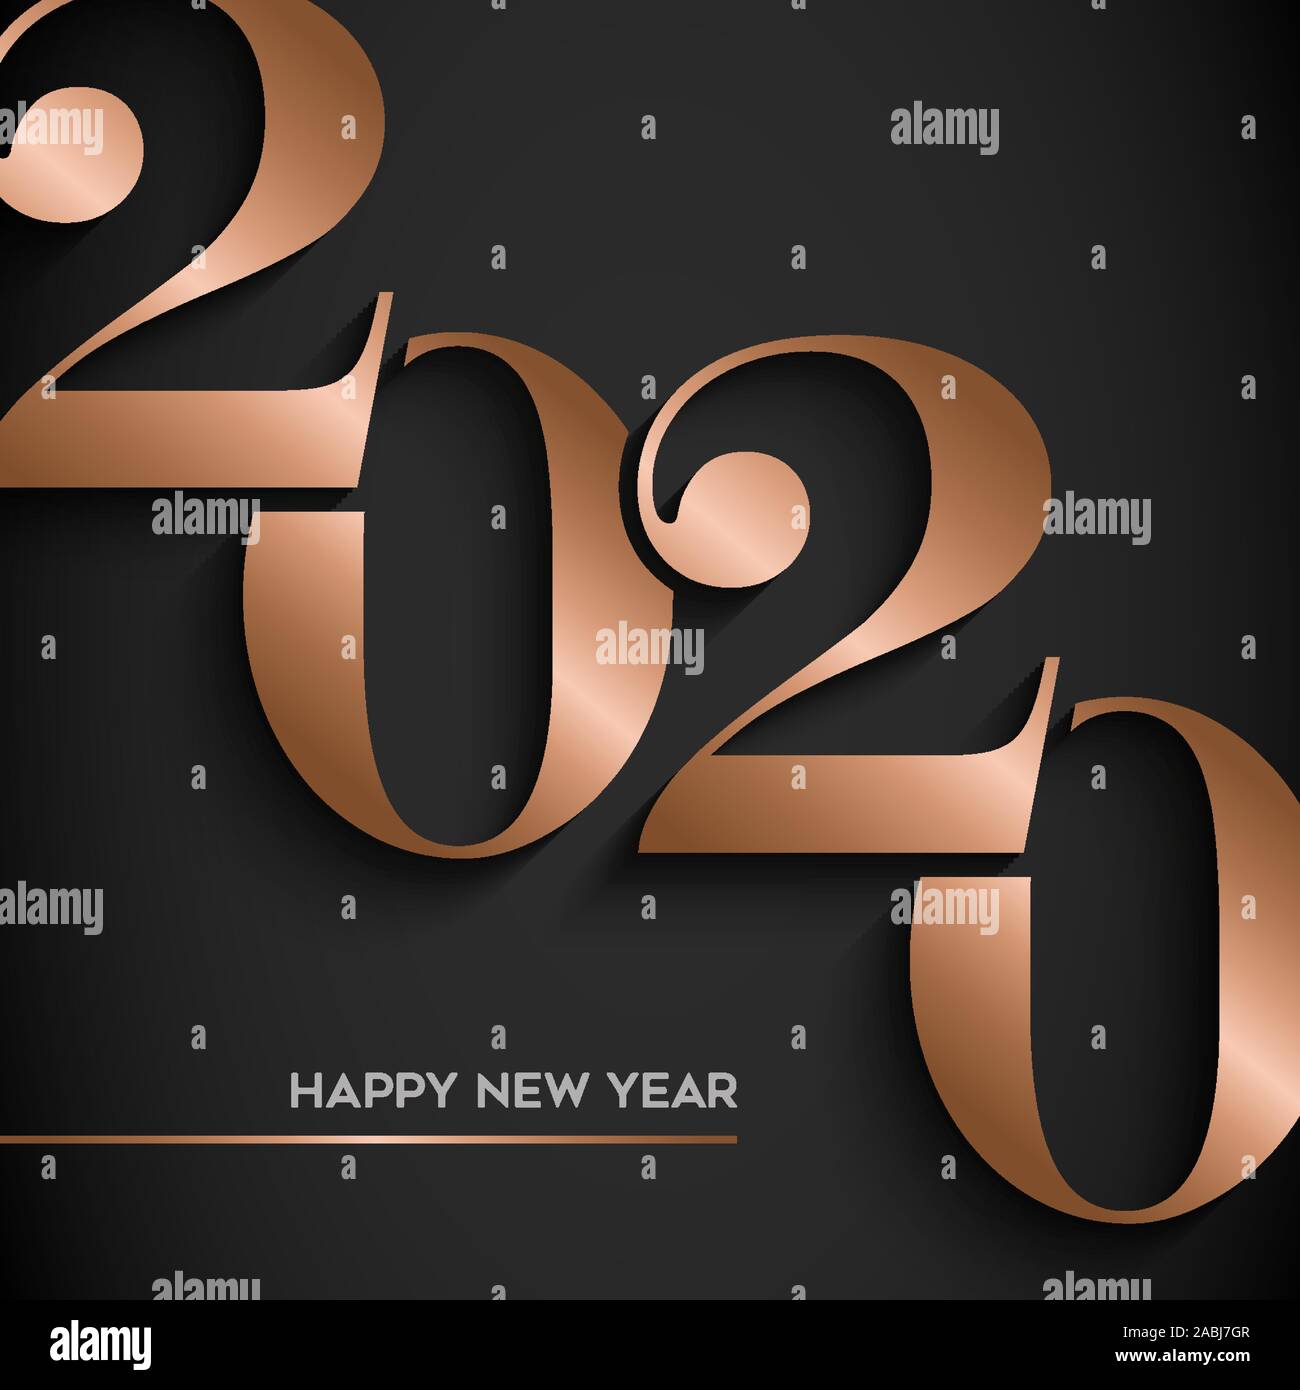 Happy New Year holiday greeting card. Luxury copper calendar number design on black background for party invitation or 2020 years eve event. Stock Vector